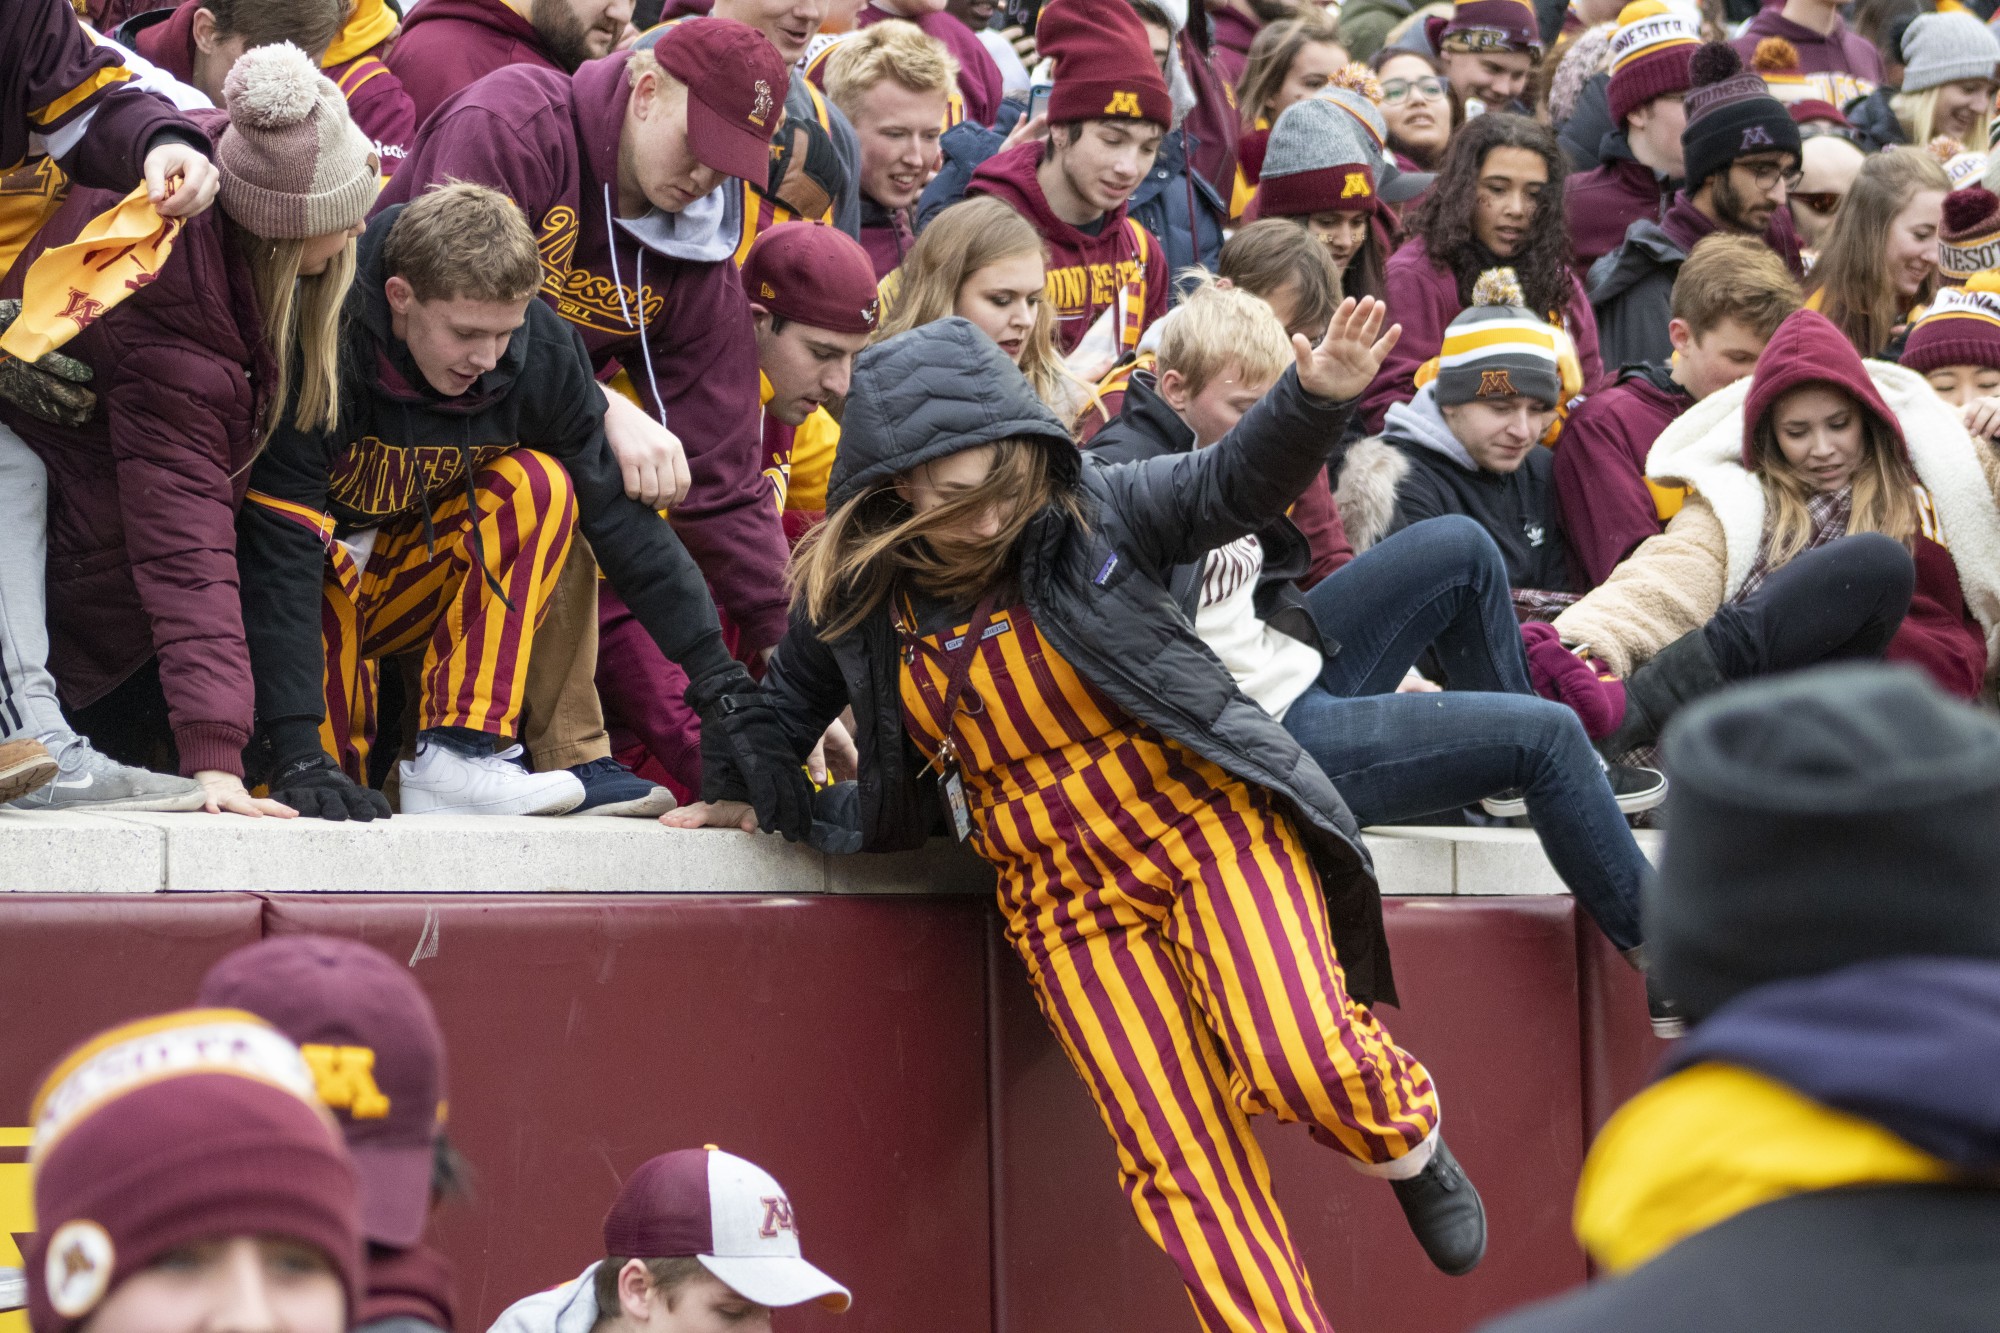 Fans storm the field at TCF Bank Stadium on Saturday, Nov. 9. The Gophers defeated Penn State 31-26 to bring their record to 9-0. A first since 1904.